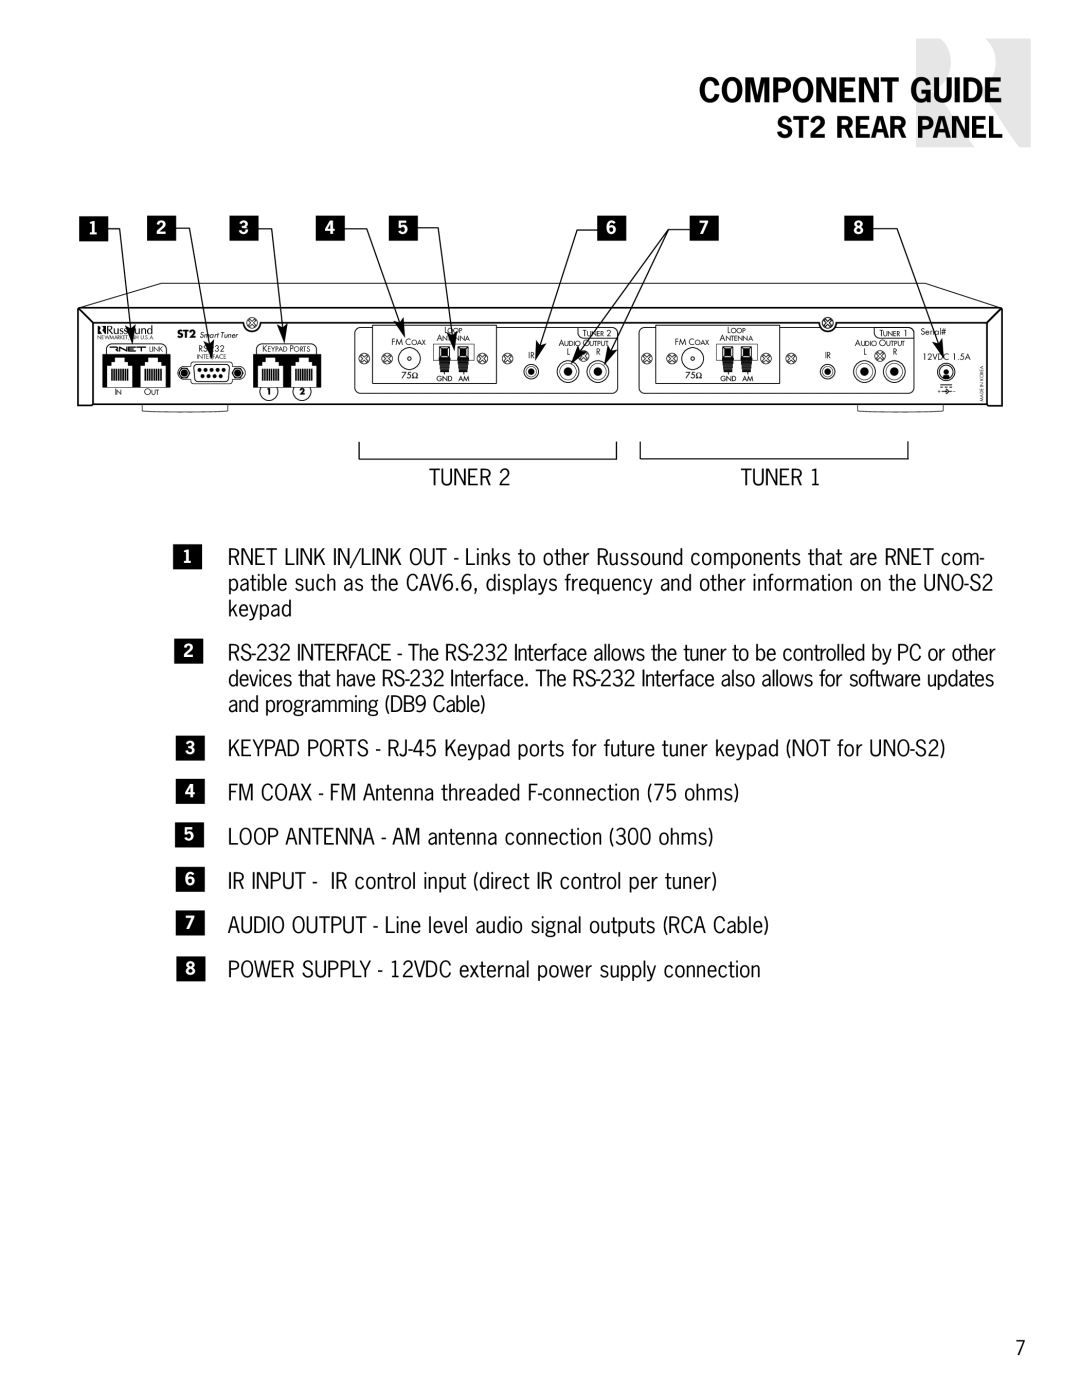 Russound instruction manual ST2 REAR PANEL, Component Guide 